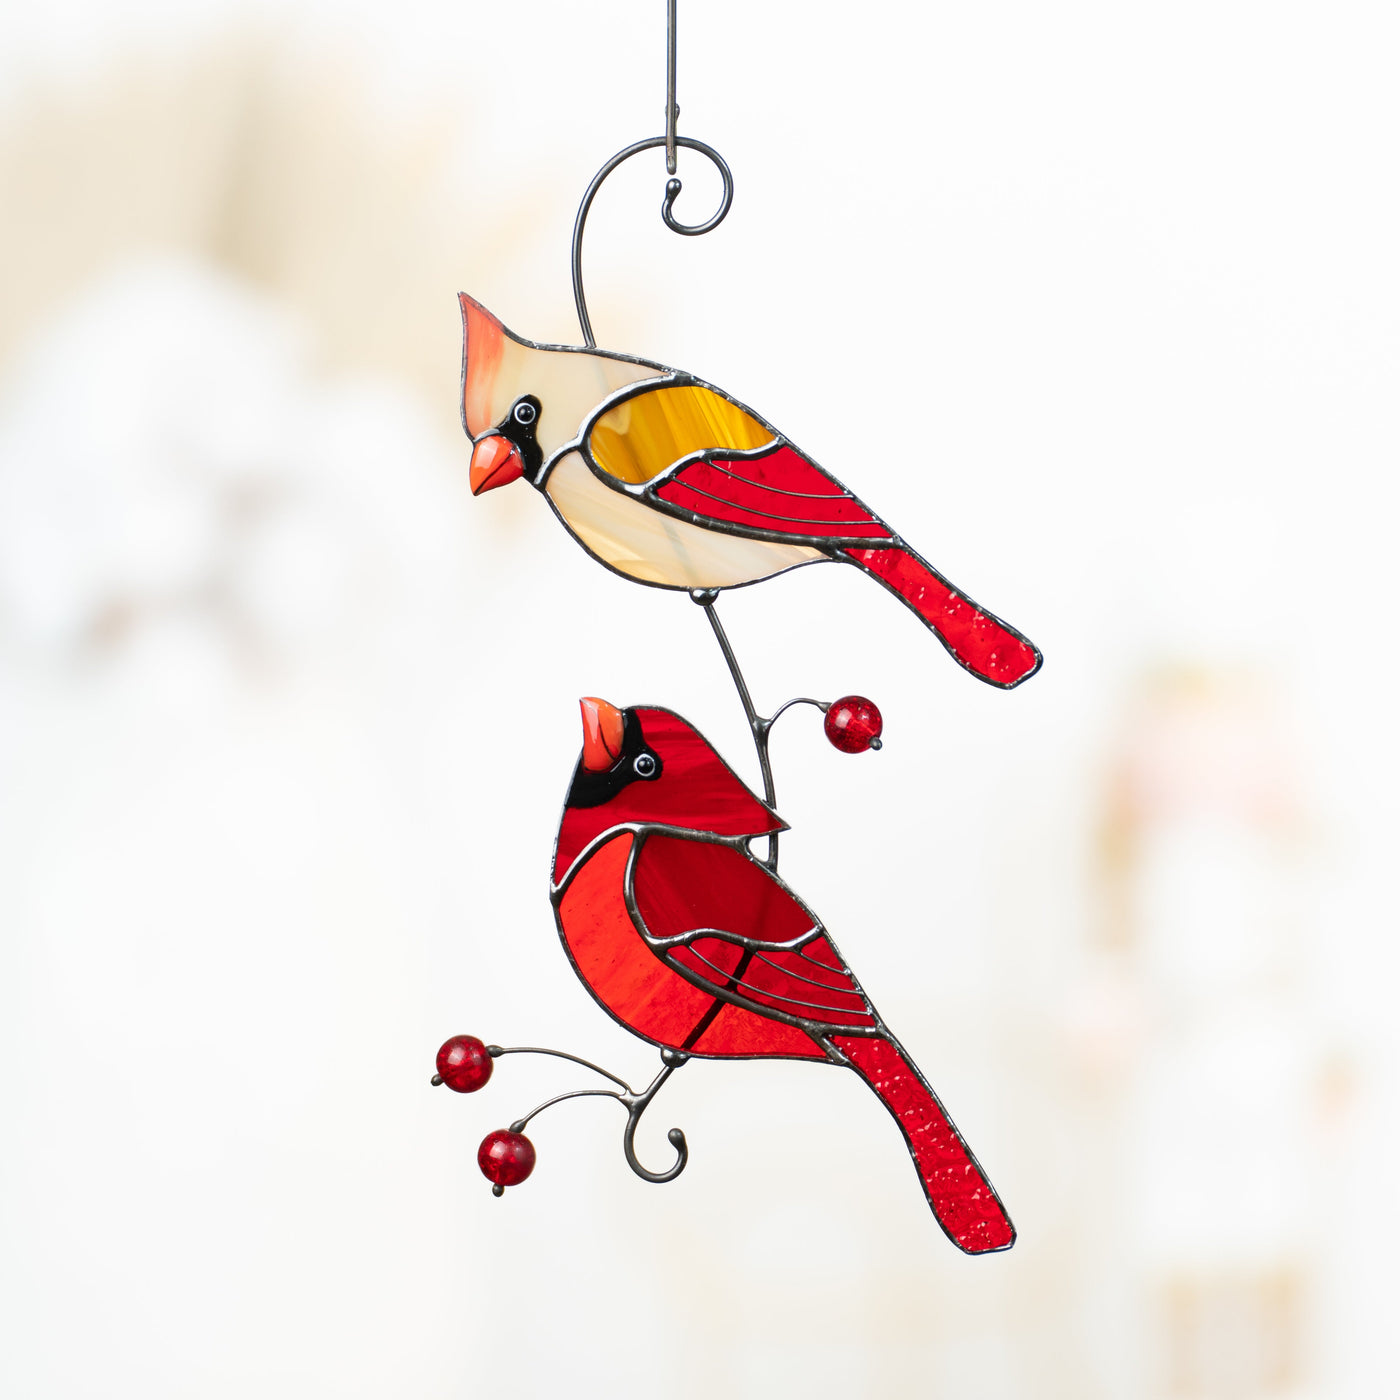 Cardinals looking at each other on the branch with berries suncatcher of stained glass